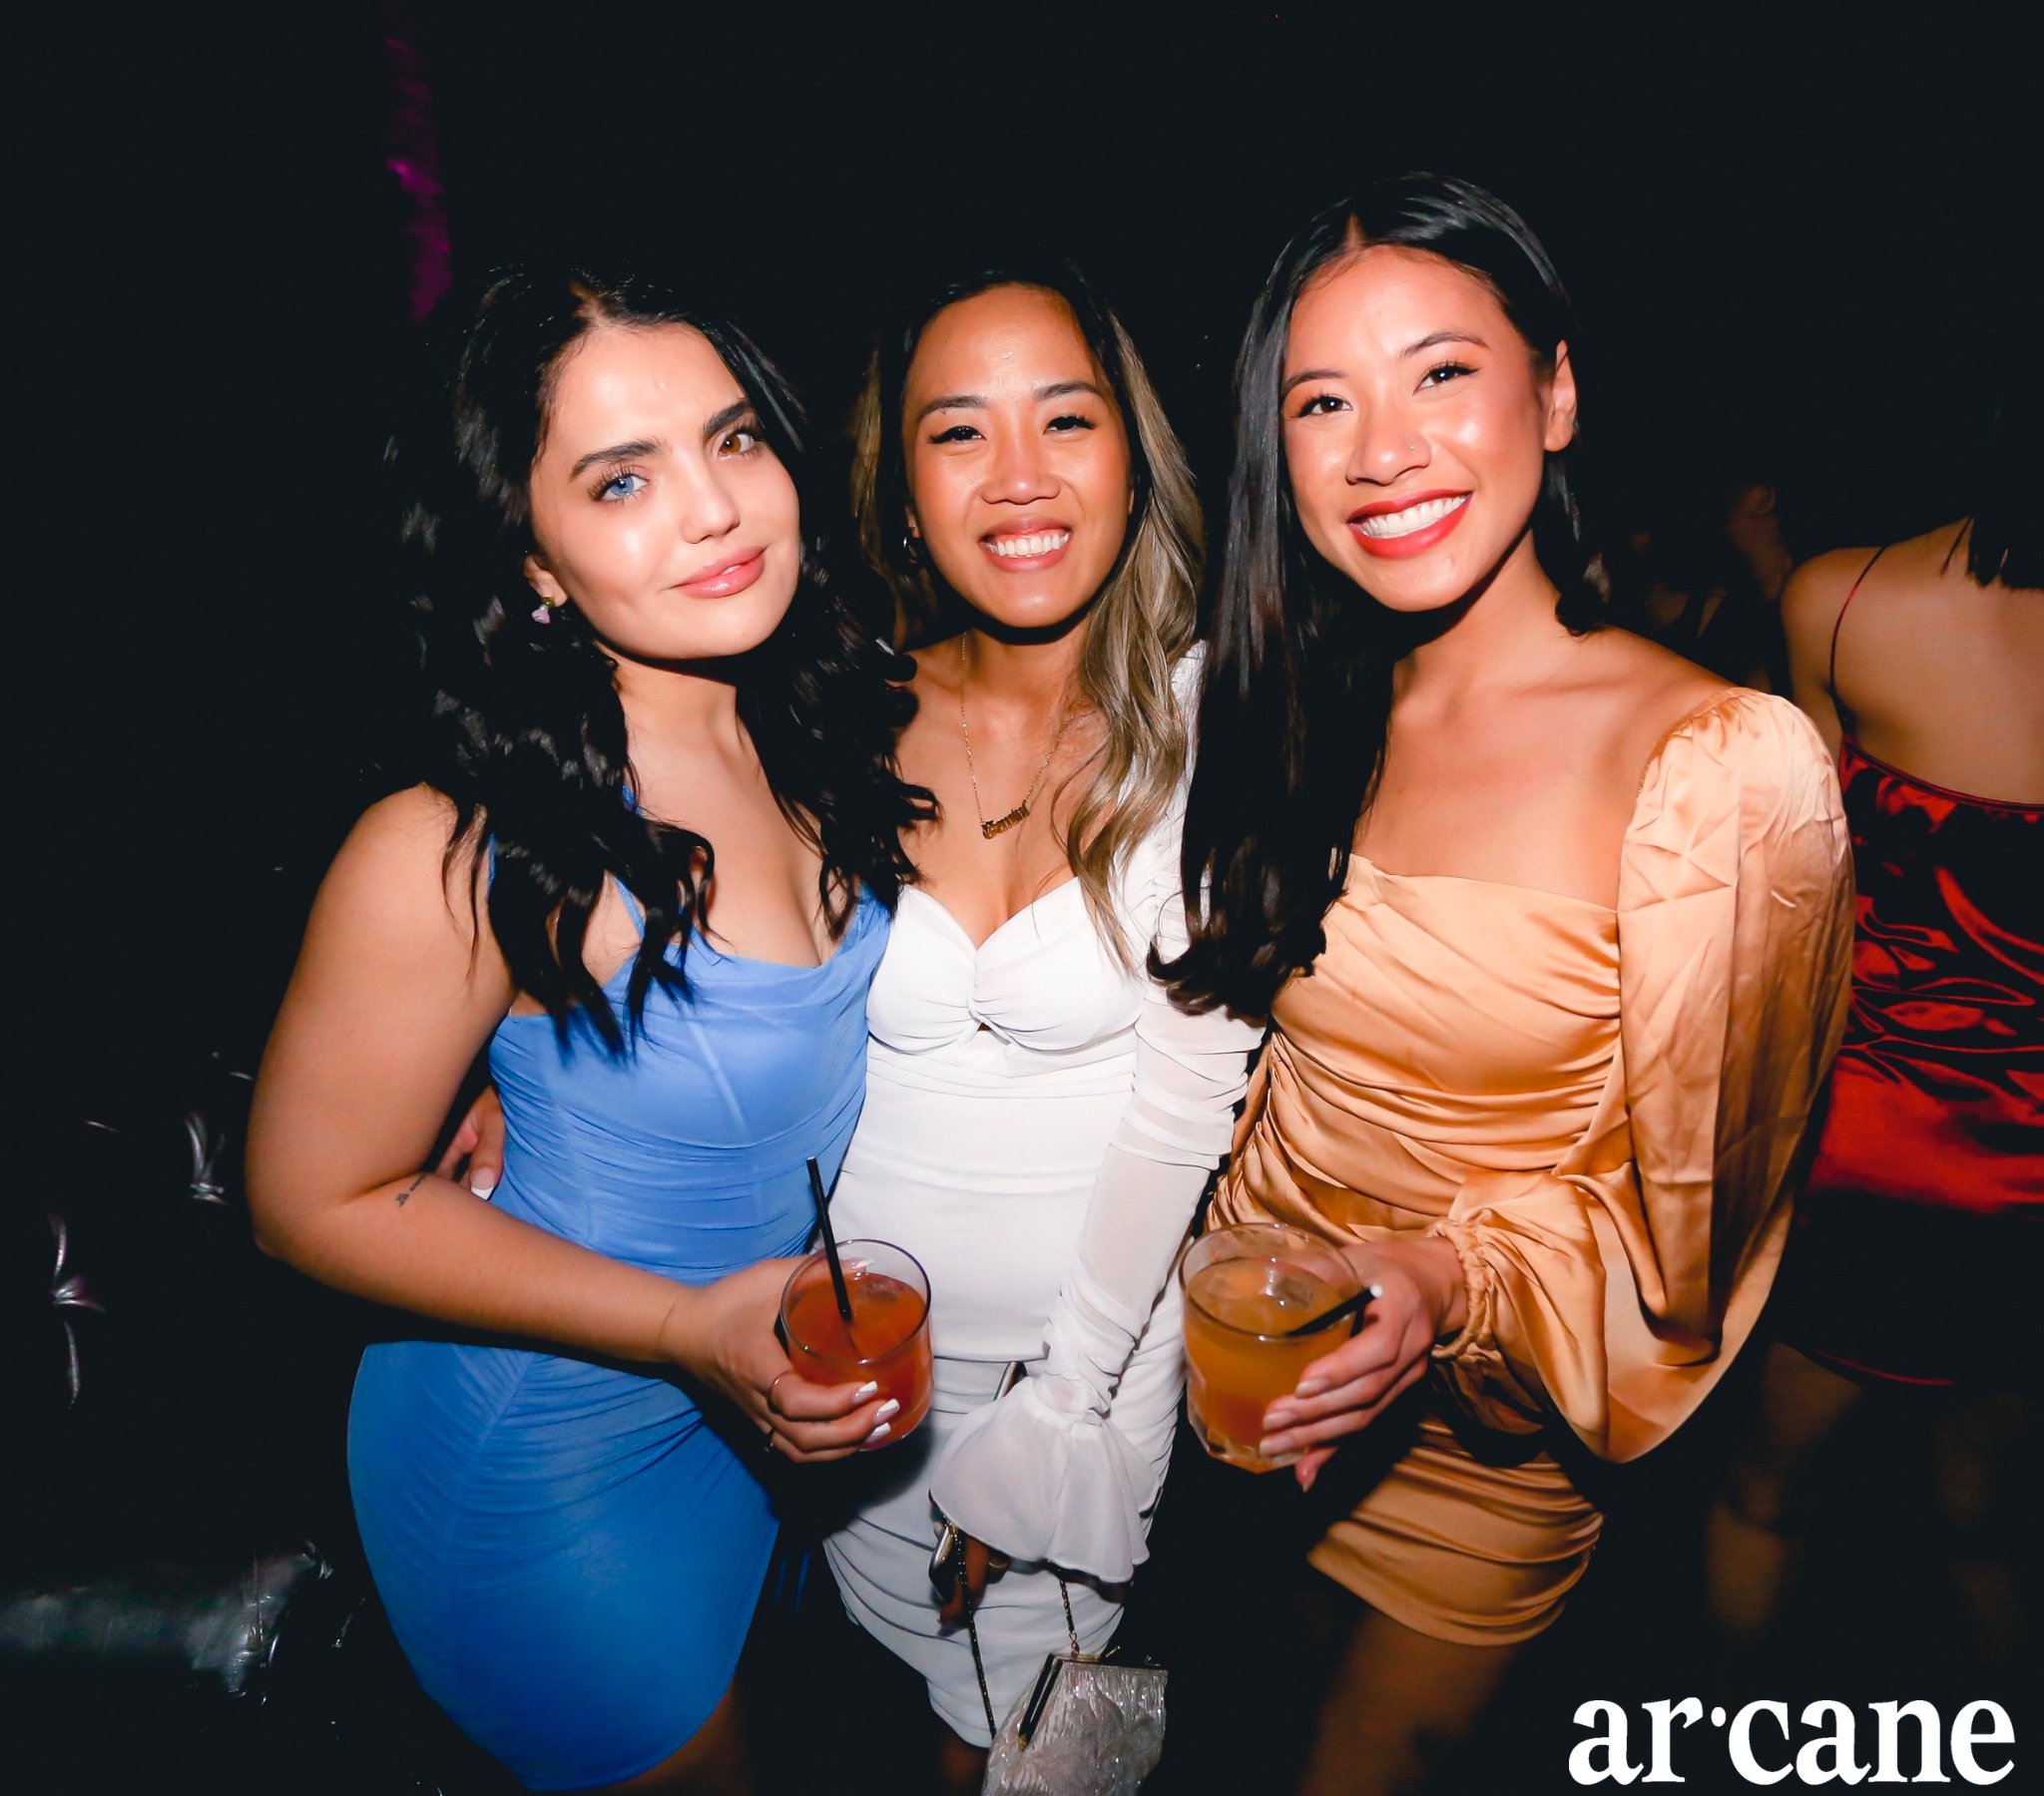 Indonesia Night Club Sex Porn - Toronto: Nightlife and Clubs | Nightlife City Guides